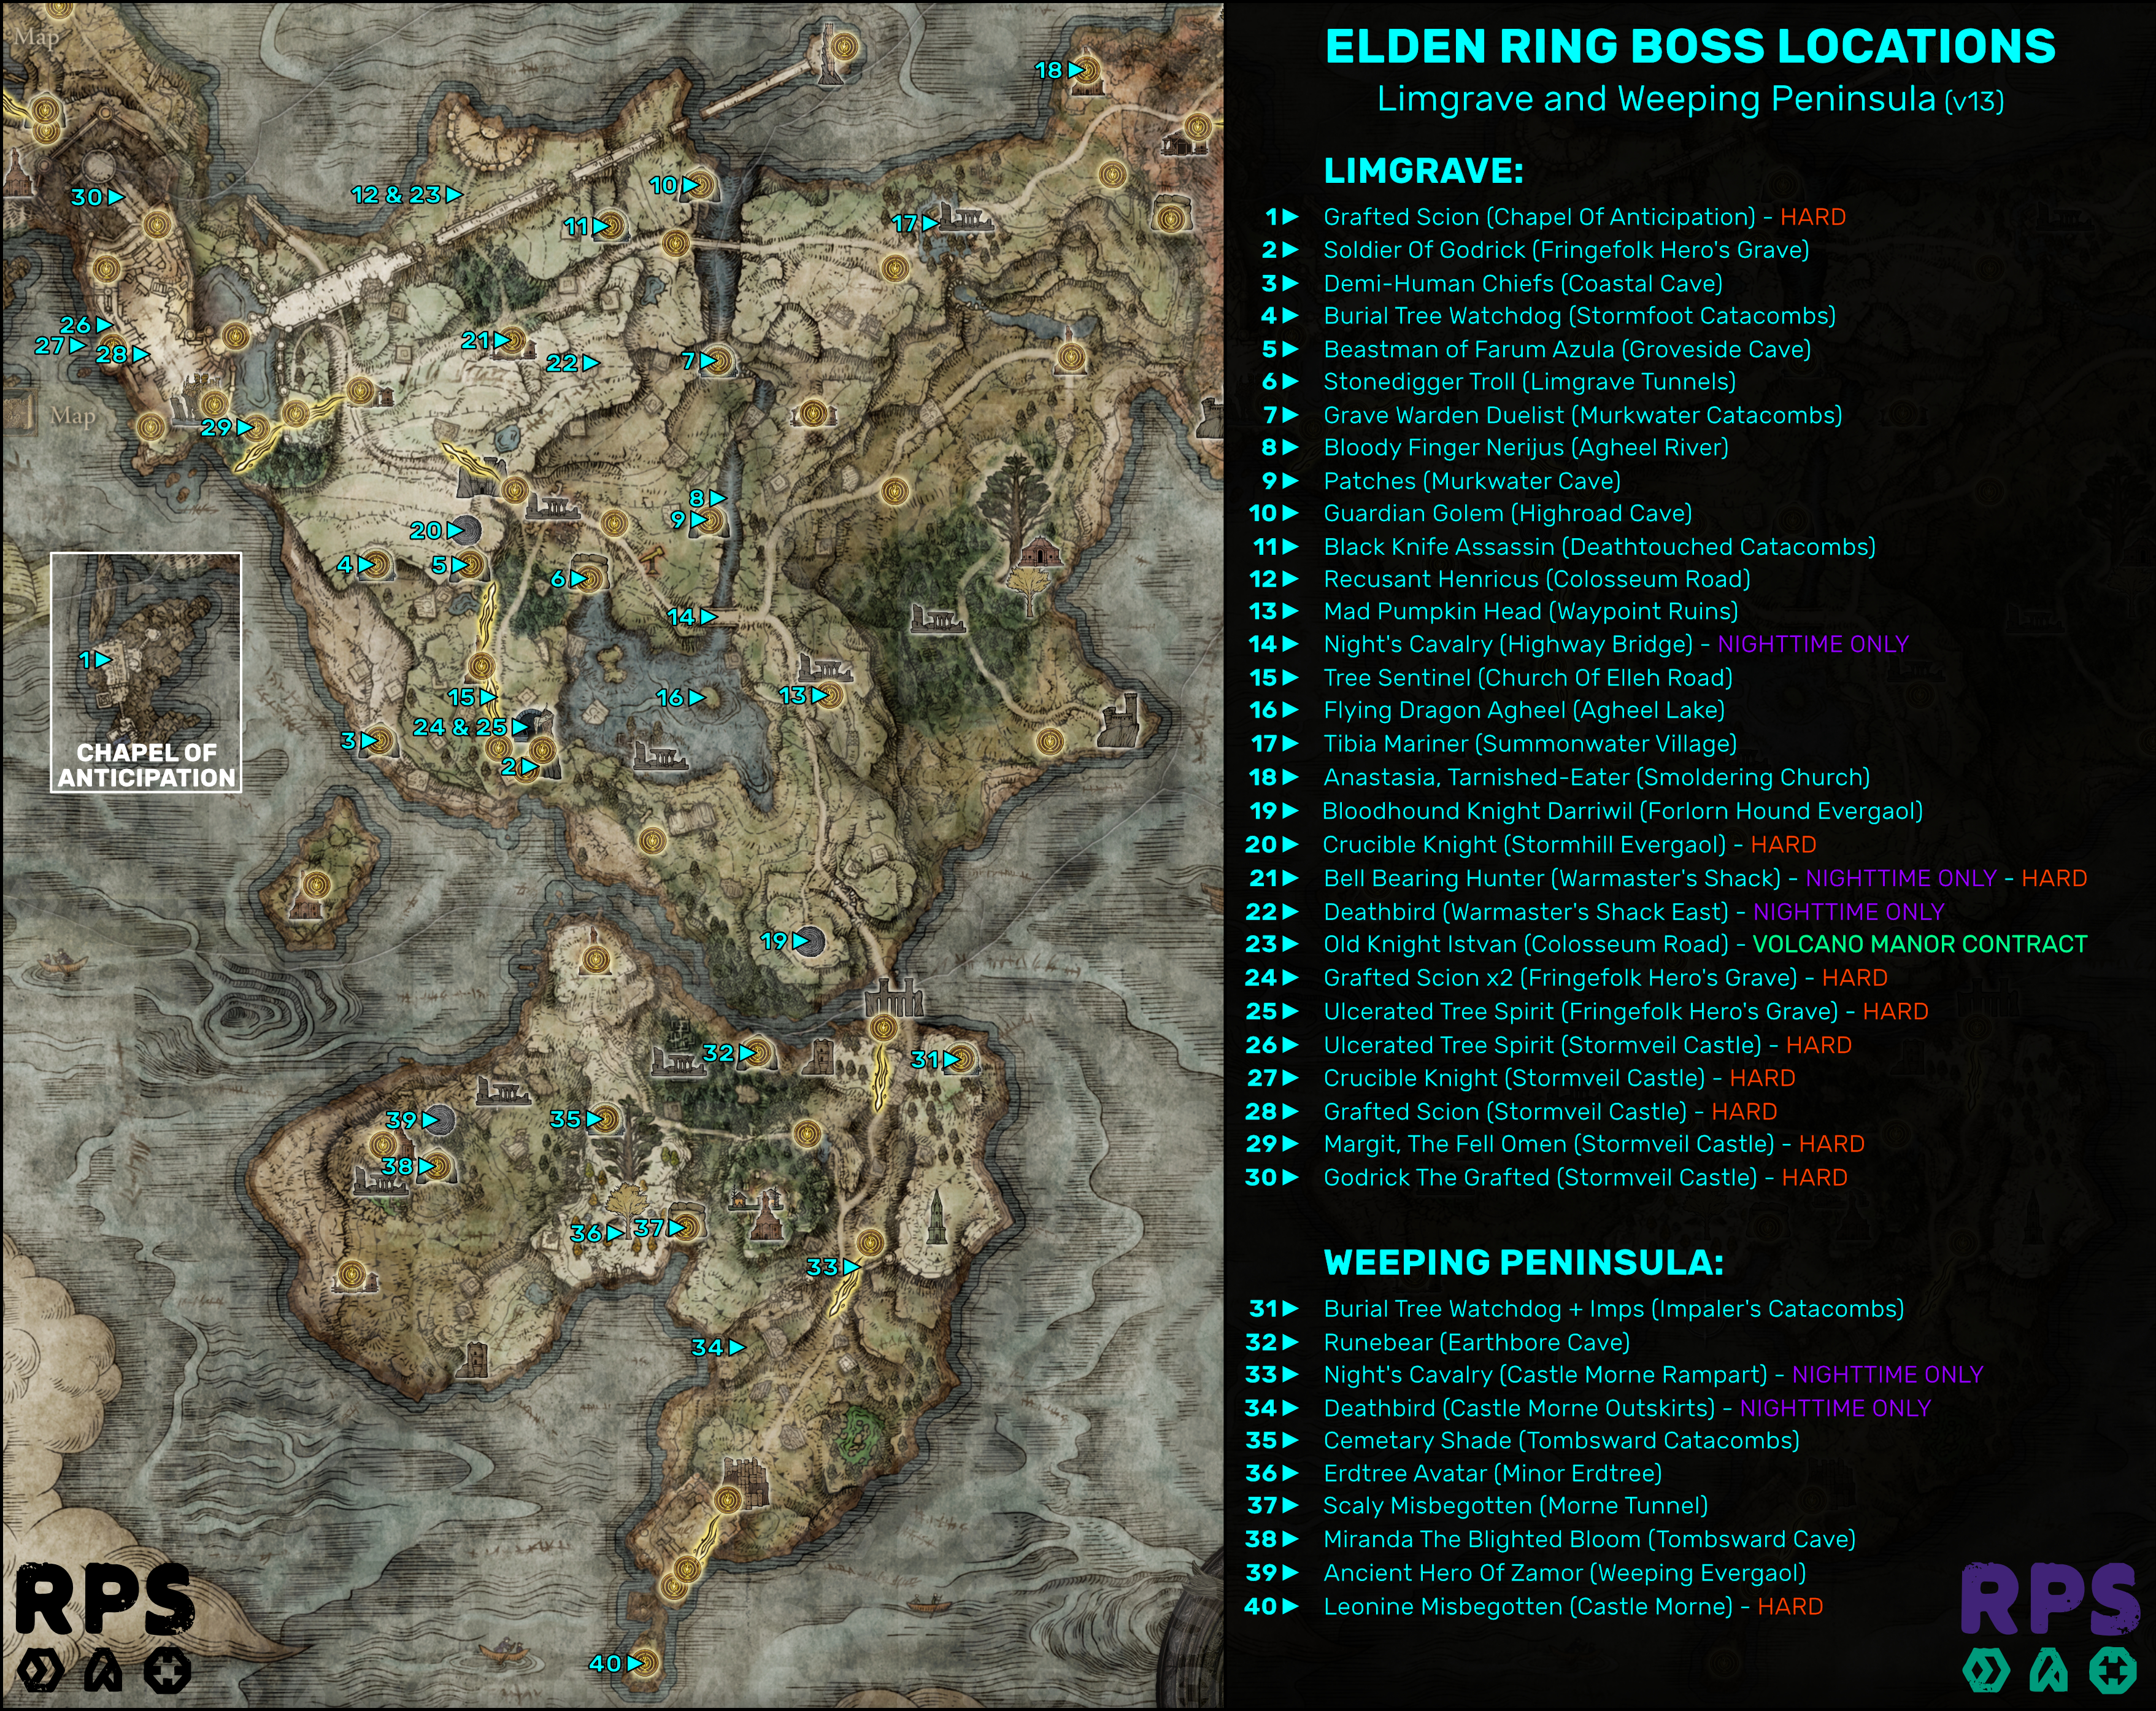 Bloodhound Knight - Elden Ring - Liurnia of the Lakes Bosses - Bosses